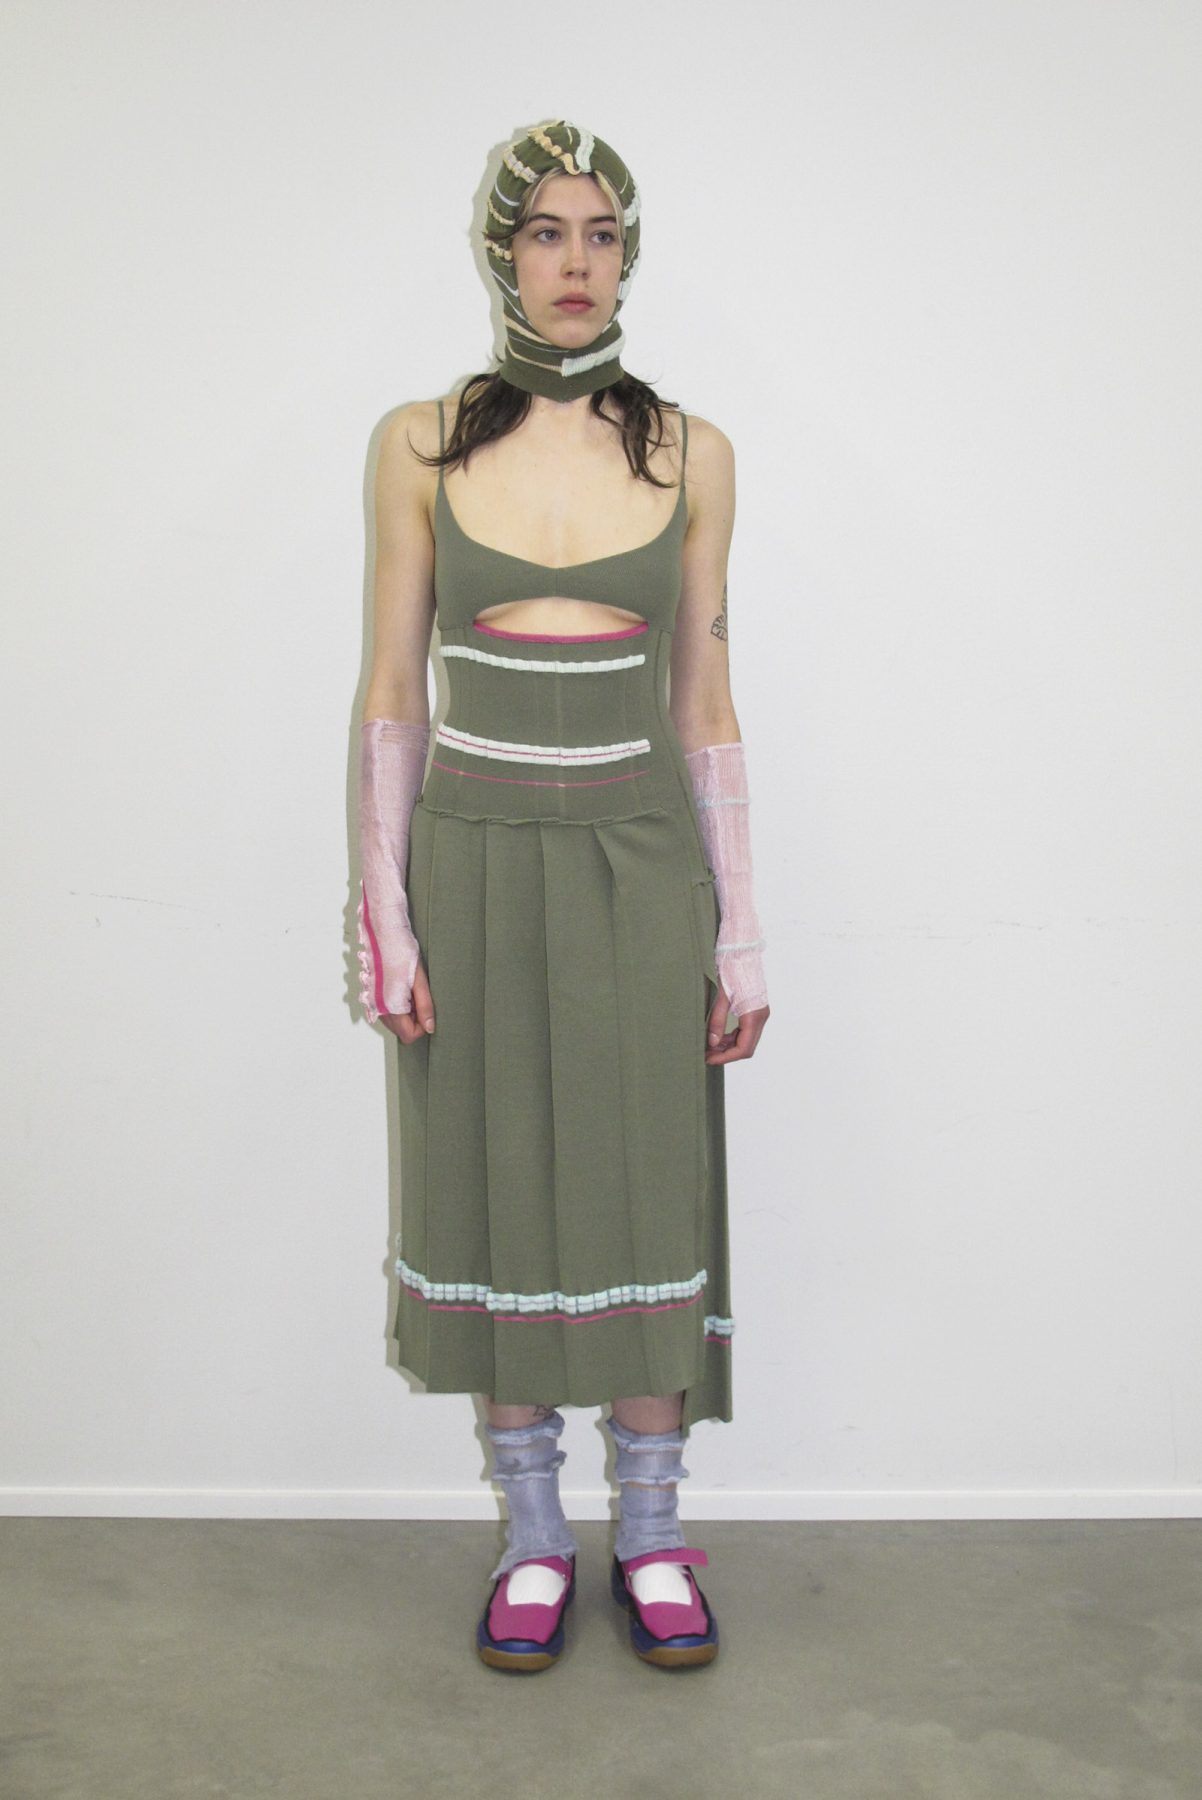 Model wearing a green knitted striped dress, matching balaclava, lilac socs and pink shoes